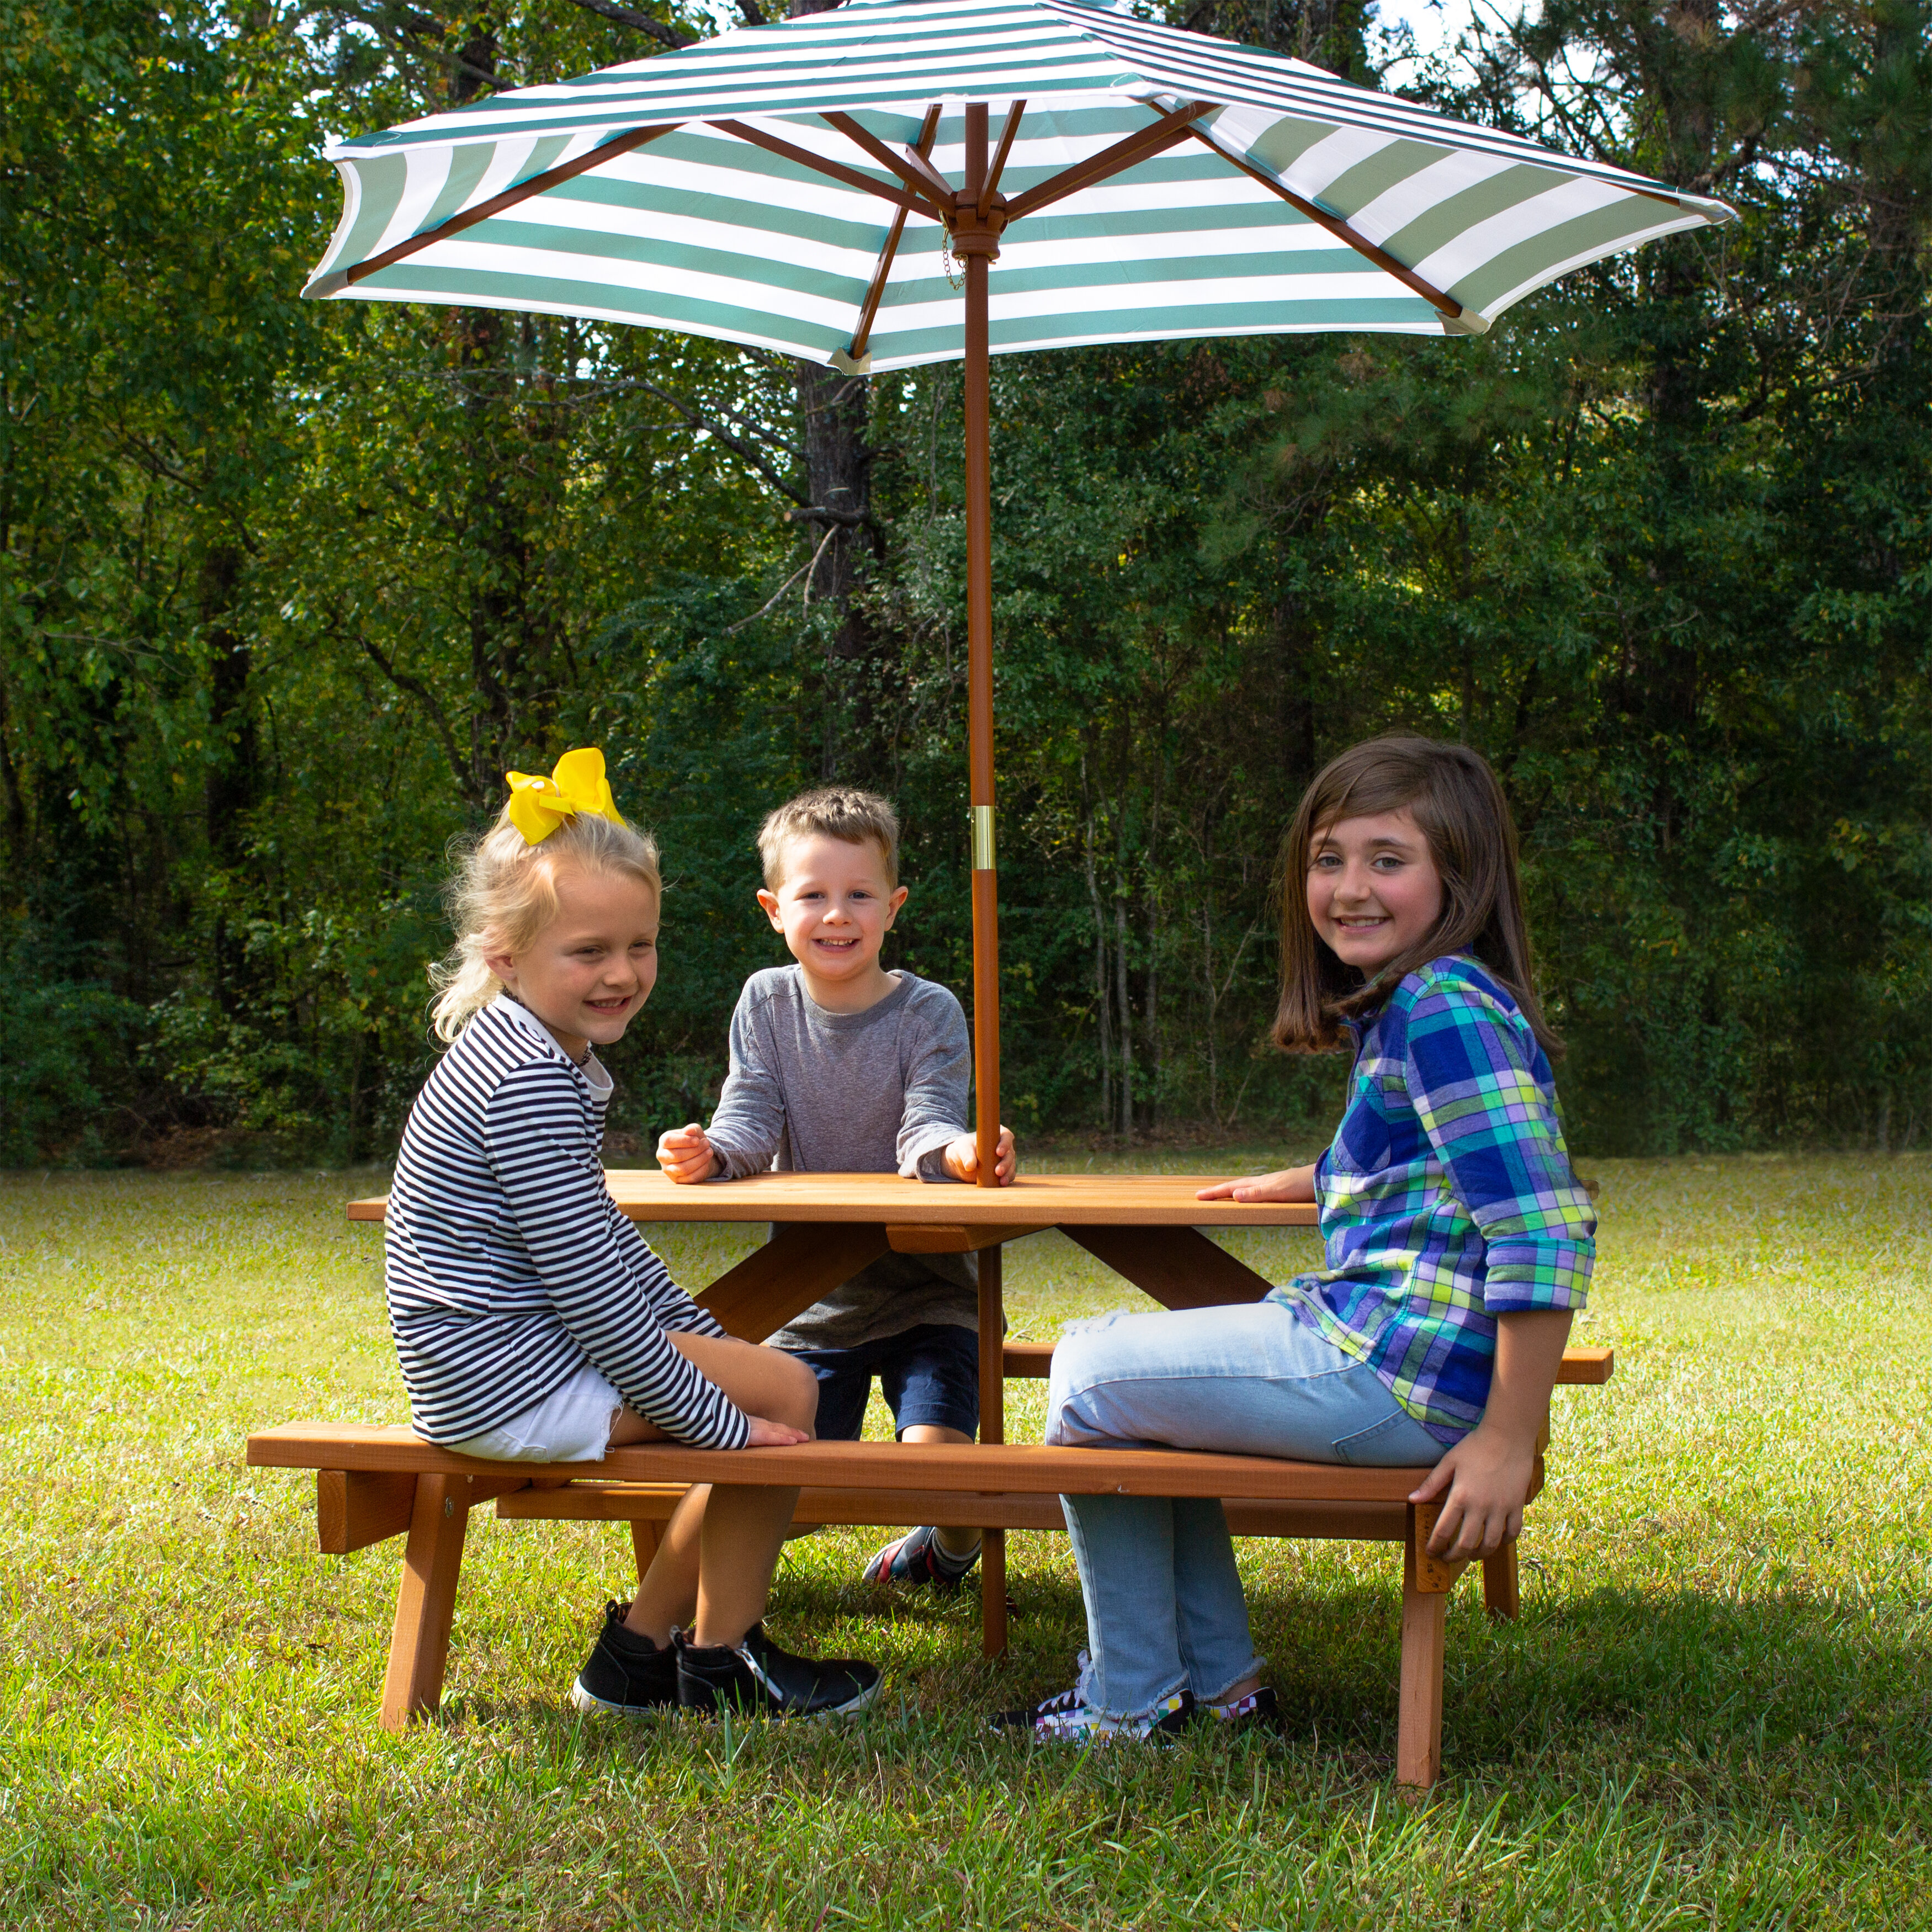 PARK OUTDOOR Table